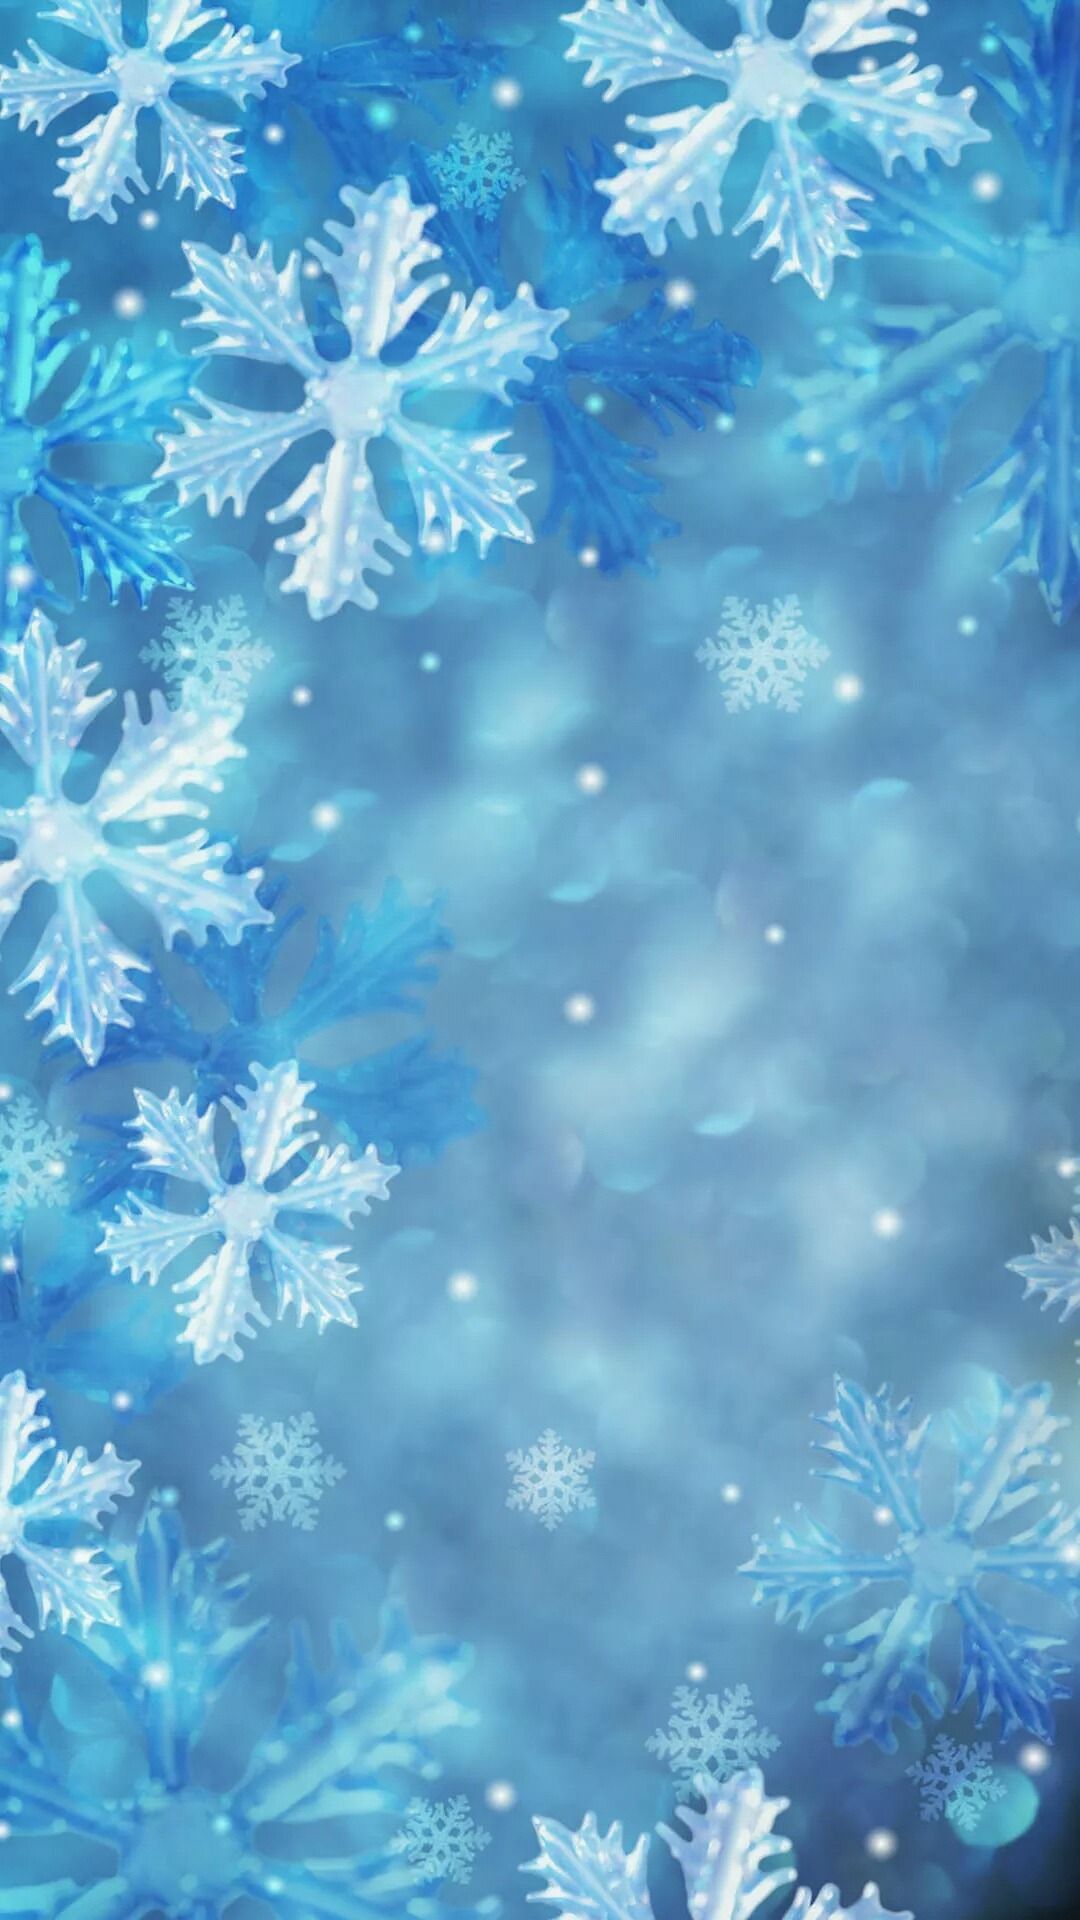 Blue and white snowflakes on a blue background - Snowflake